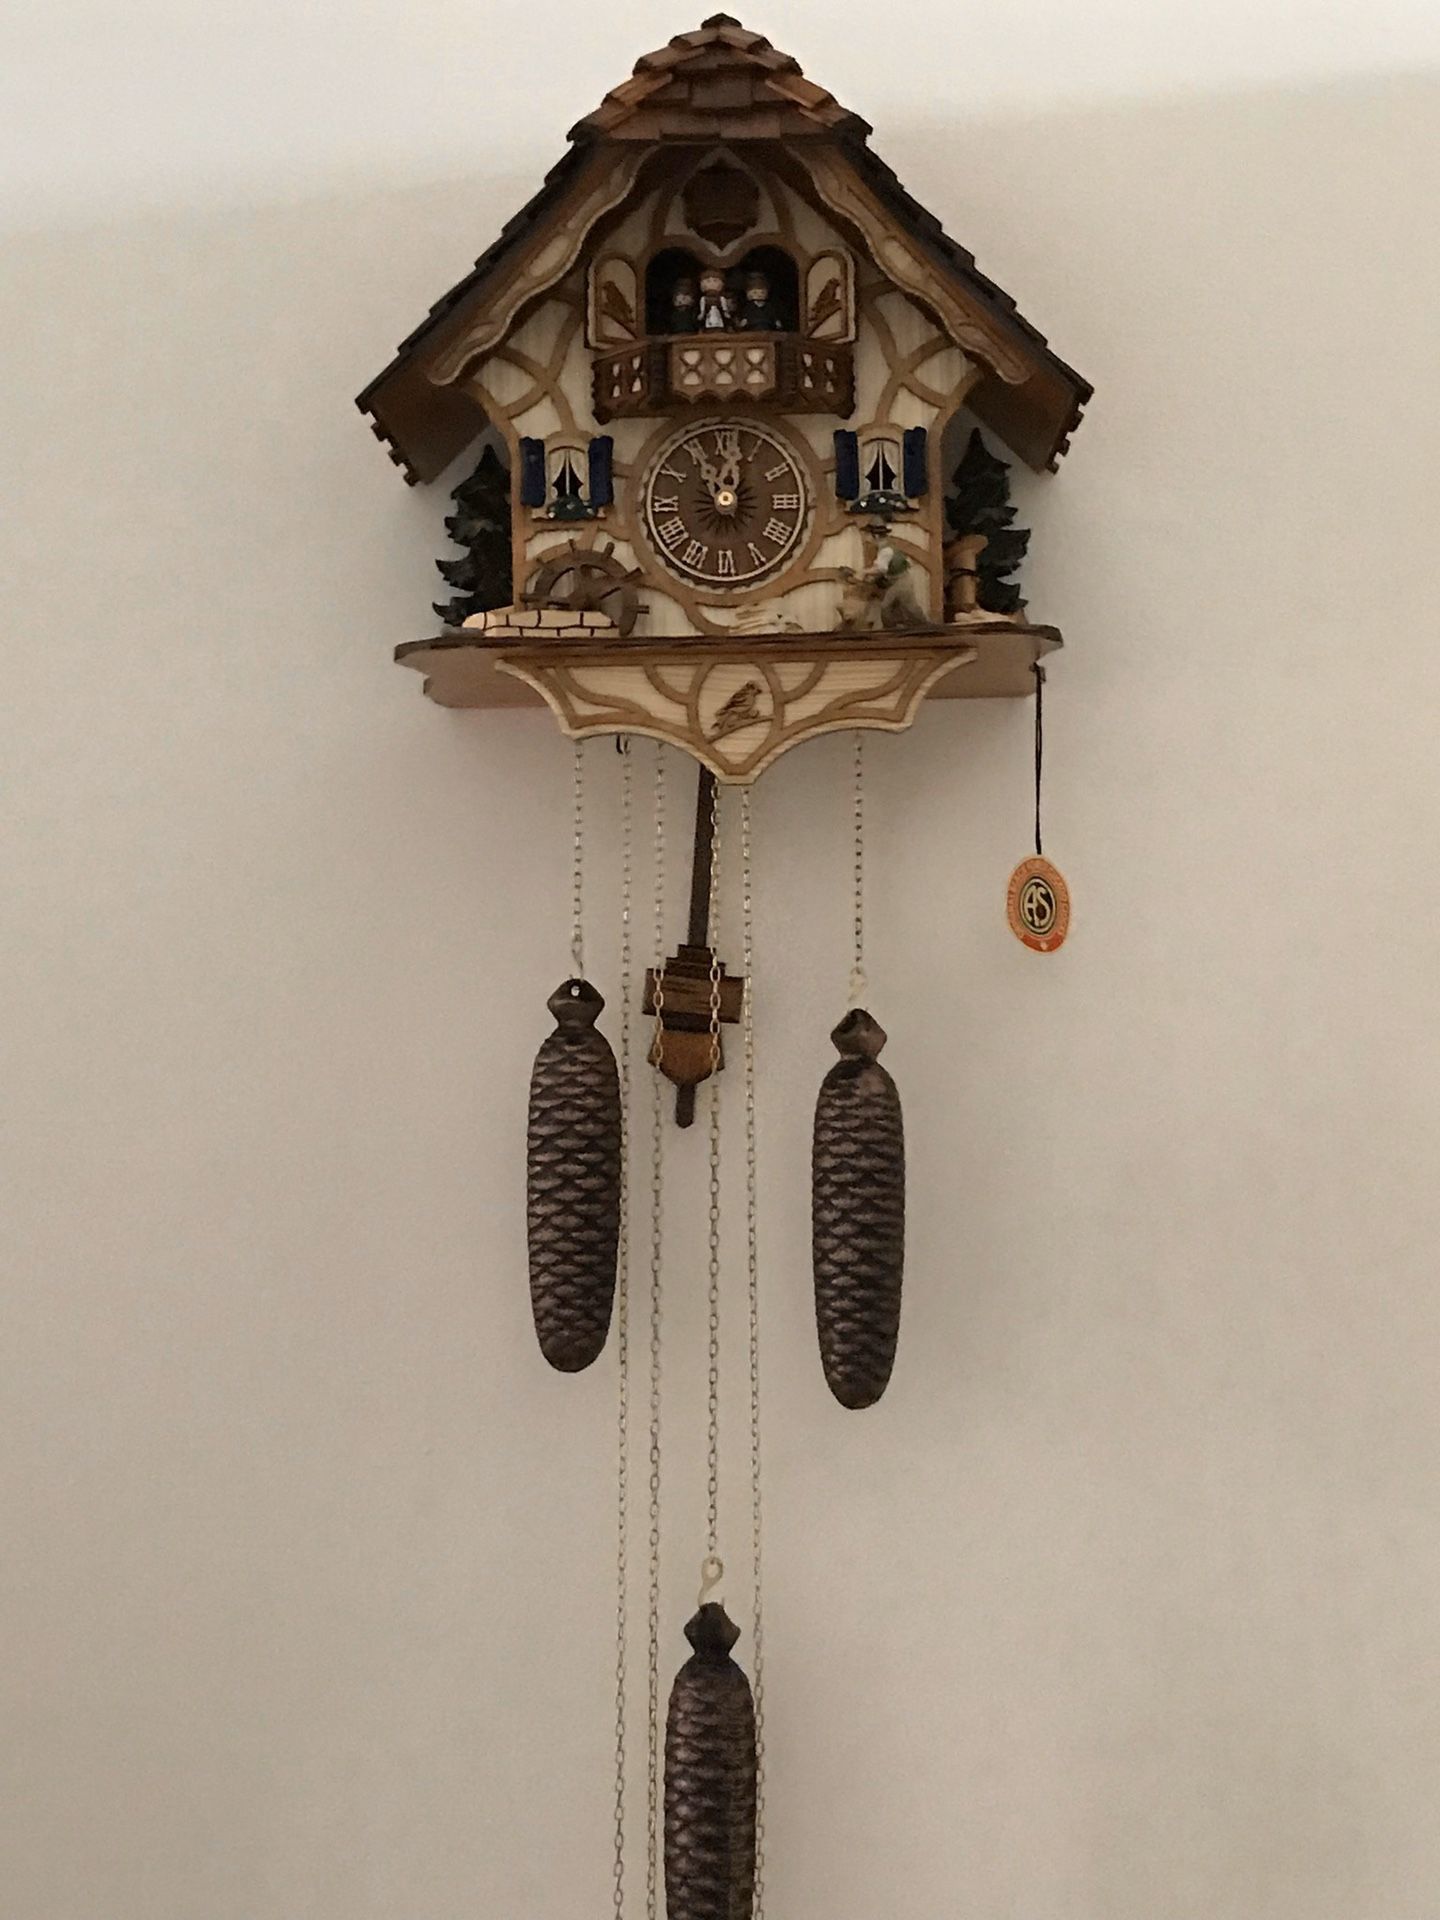 German Black Forest Kissing Lovers 8 Day Musical Chalet Cuckoo Clock, bought it in Germany